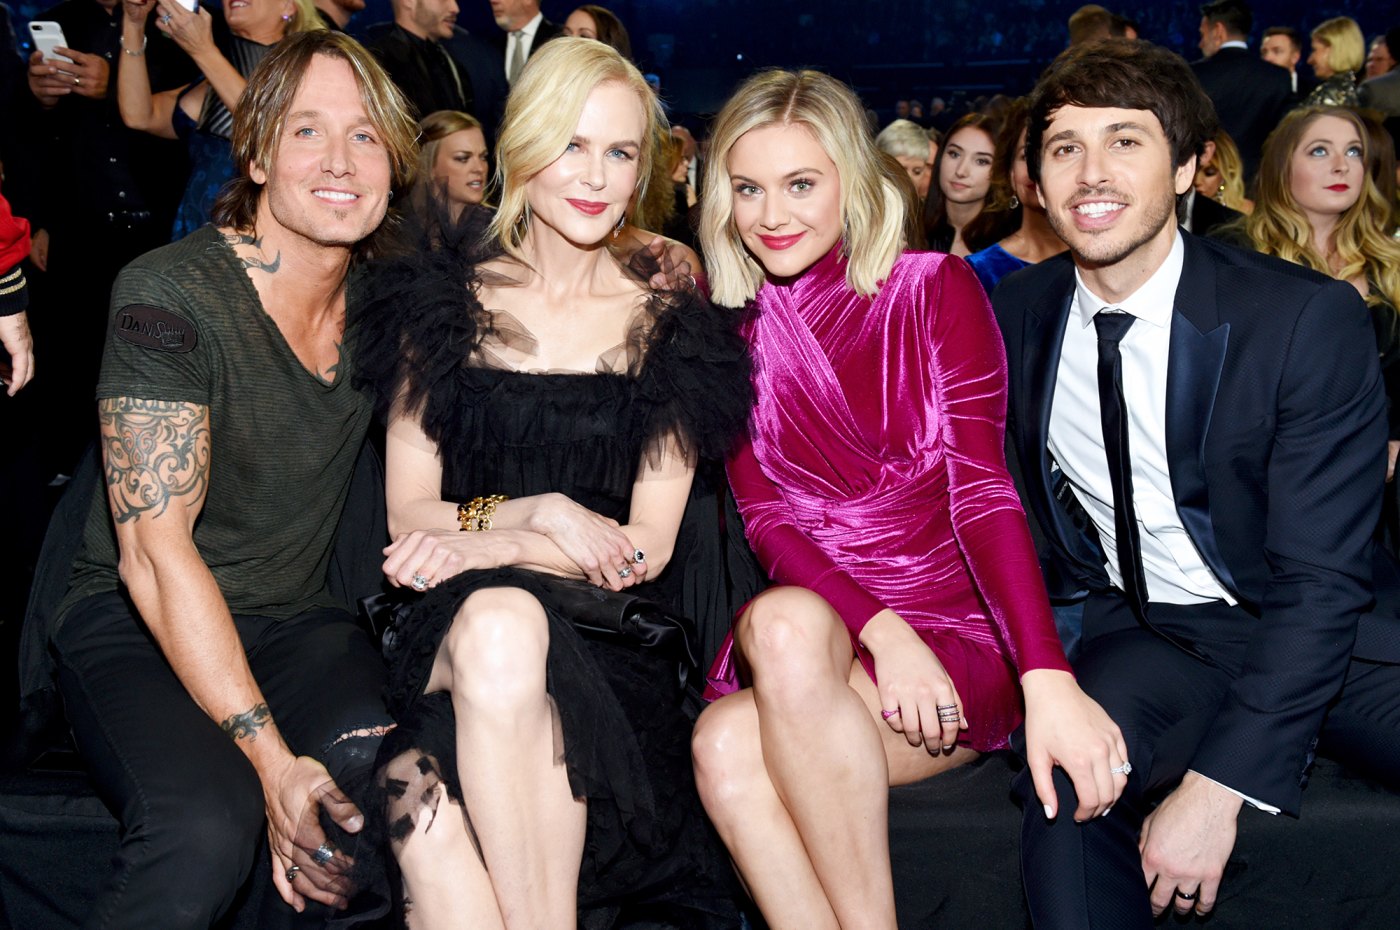 CMA Awards 2018: What You Didn’t See on TV